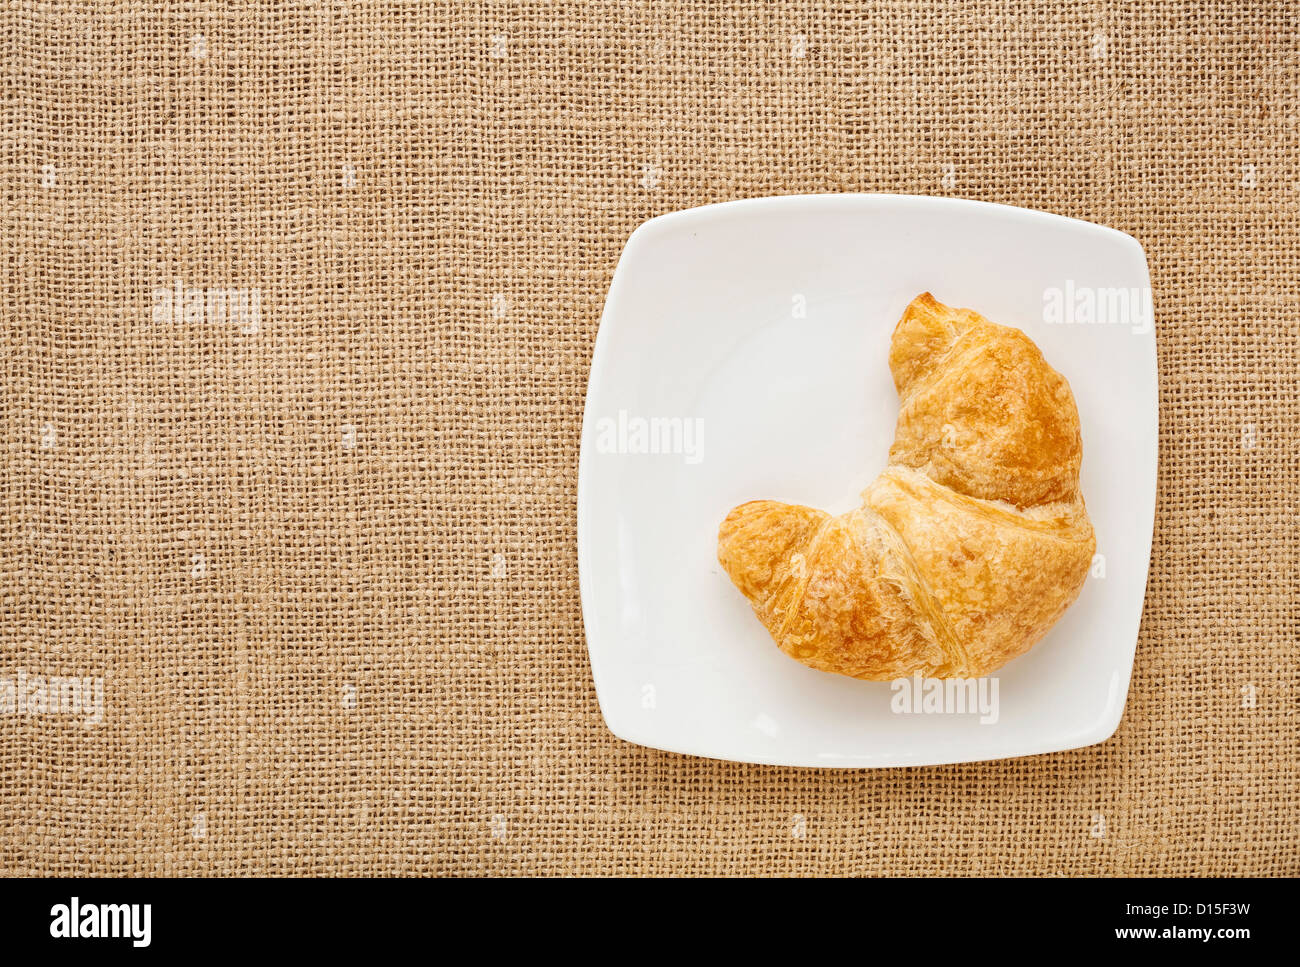 croissant roll on a white china plate against burlap canvas board Stock Photo